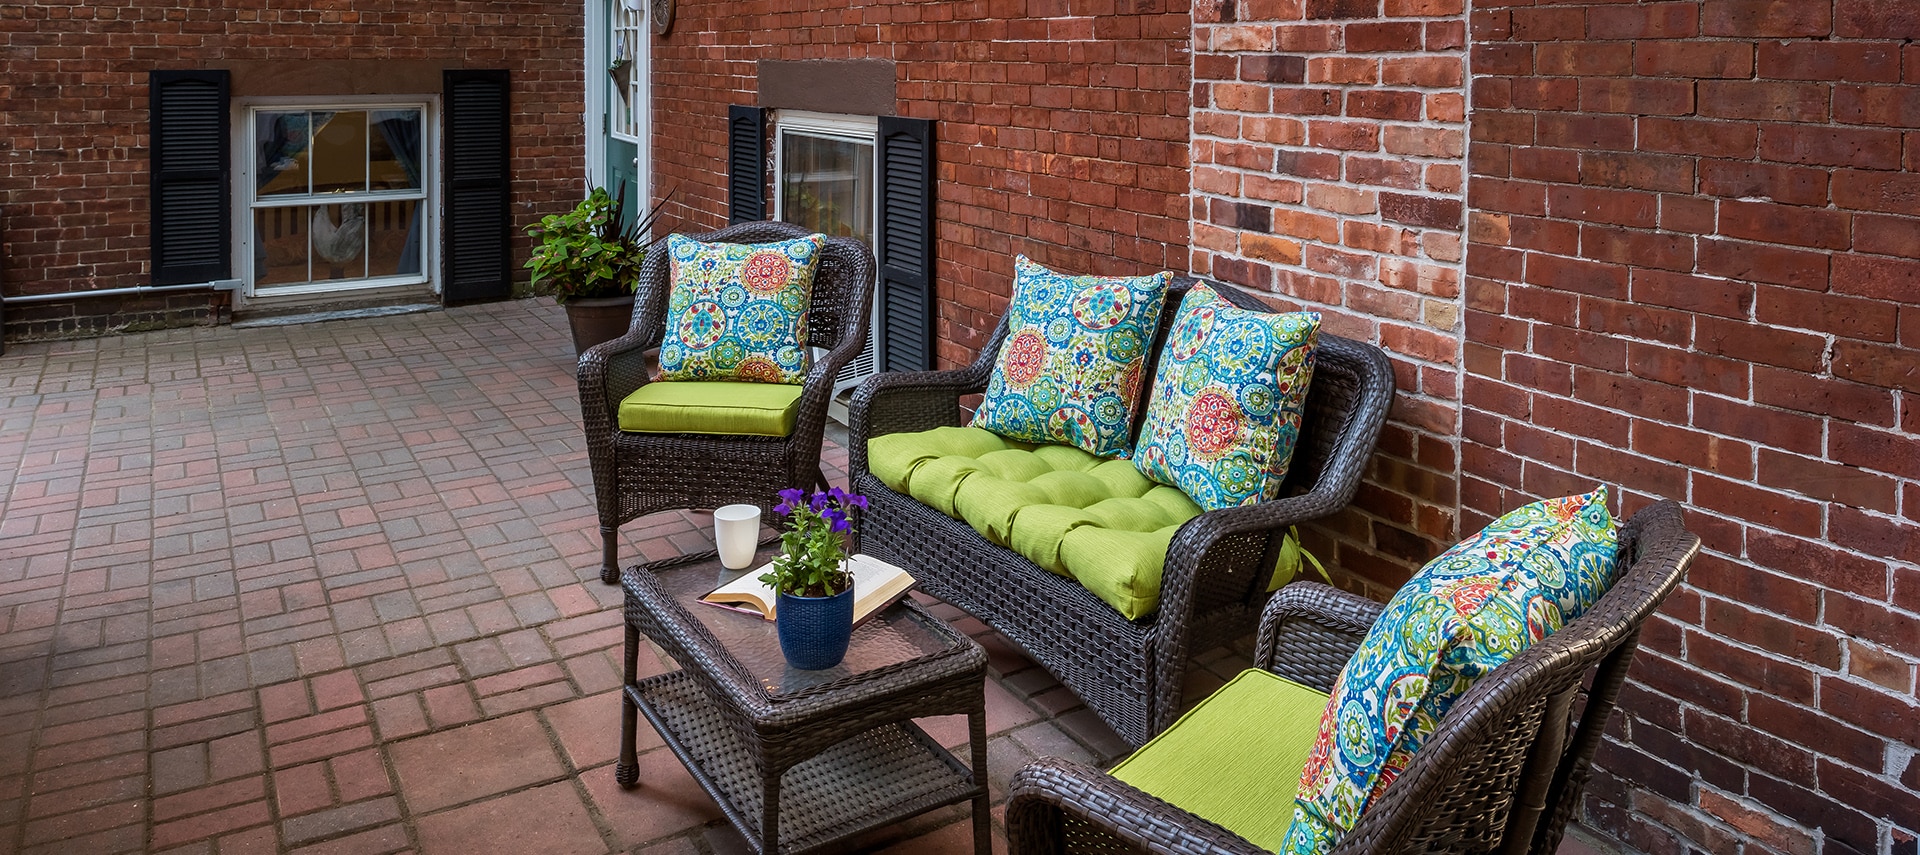 Brick patio featuring wicker furniture with bright green cushions and throw pillows.